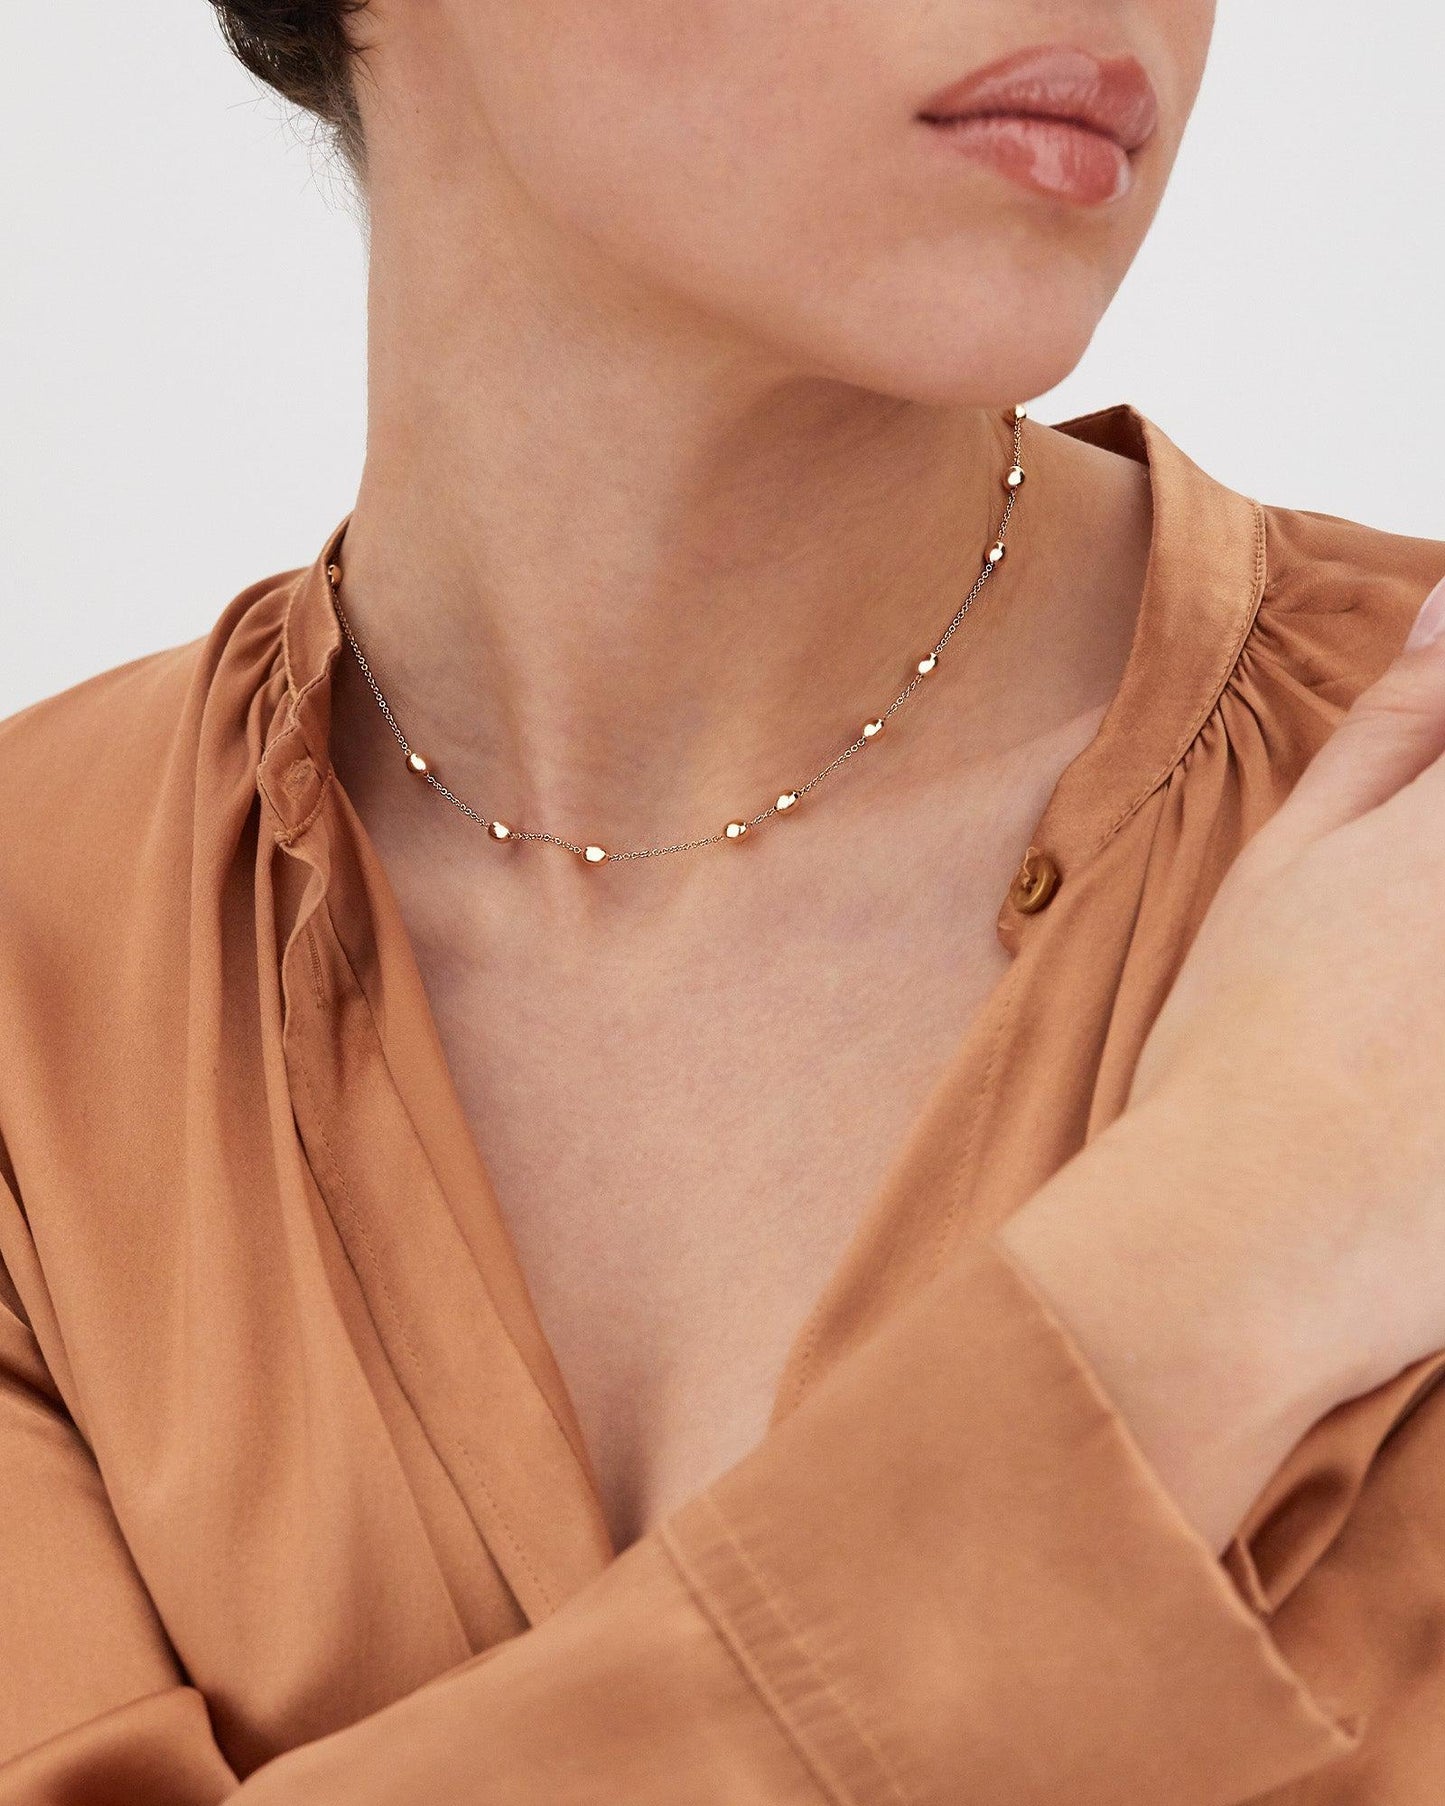 SUNSET "SOFFIO" ROSE GOLD BOULES COLLAR NECKLACE